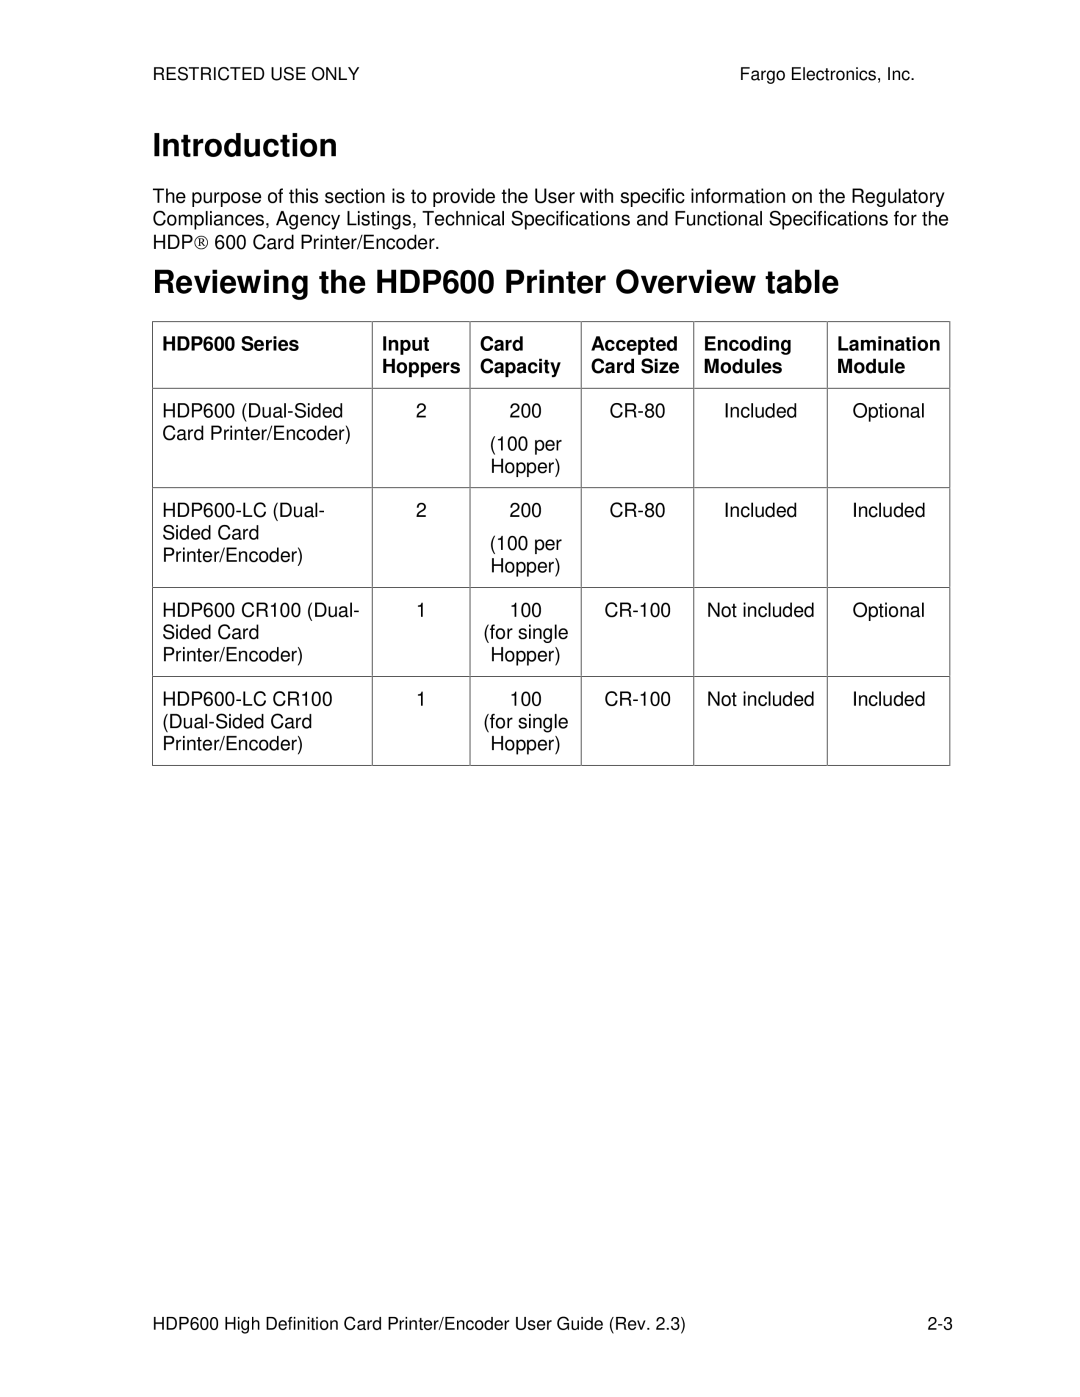 FARGO electronic HDP600 CR100, HDP600-LC manual Introduction, Reviewing the HDP600 Printer Overview table 